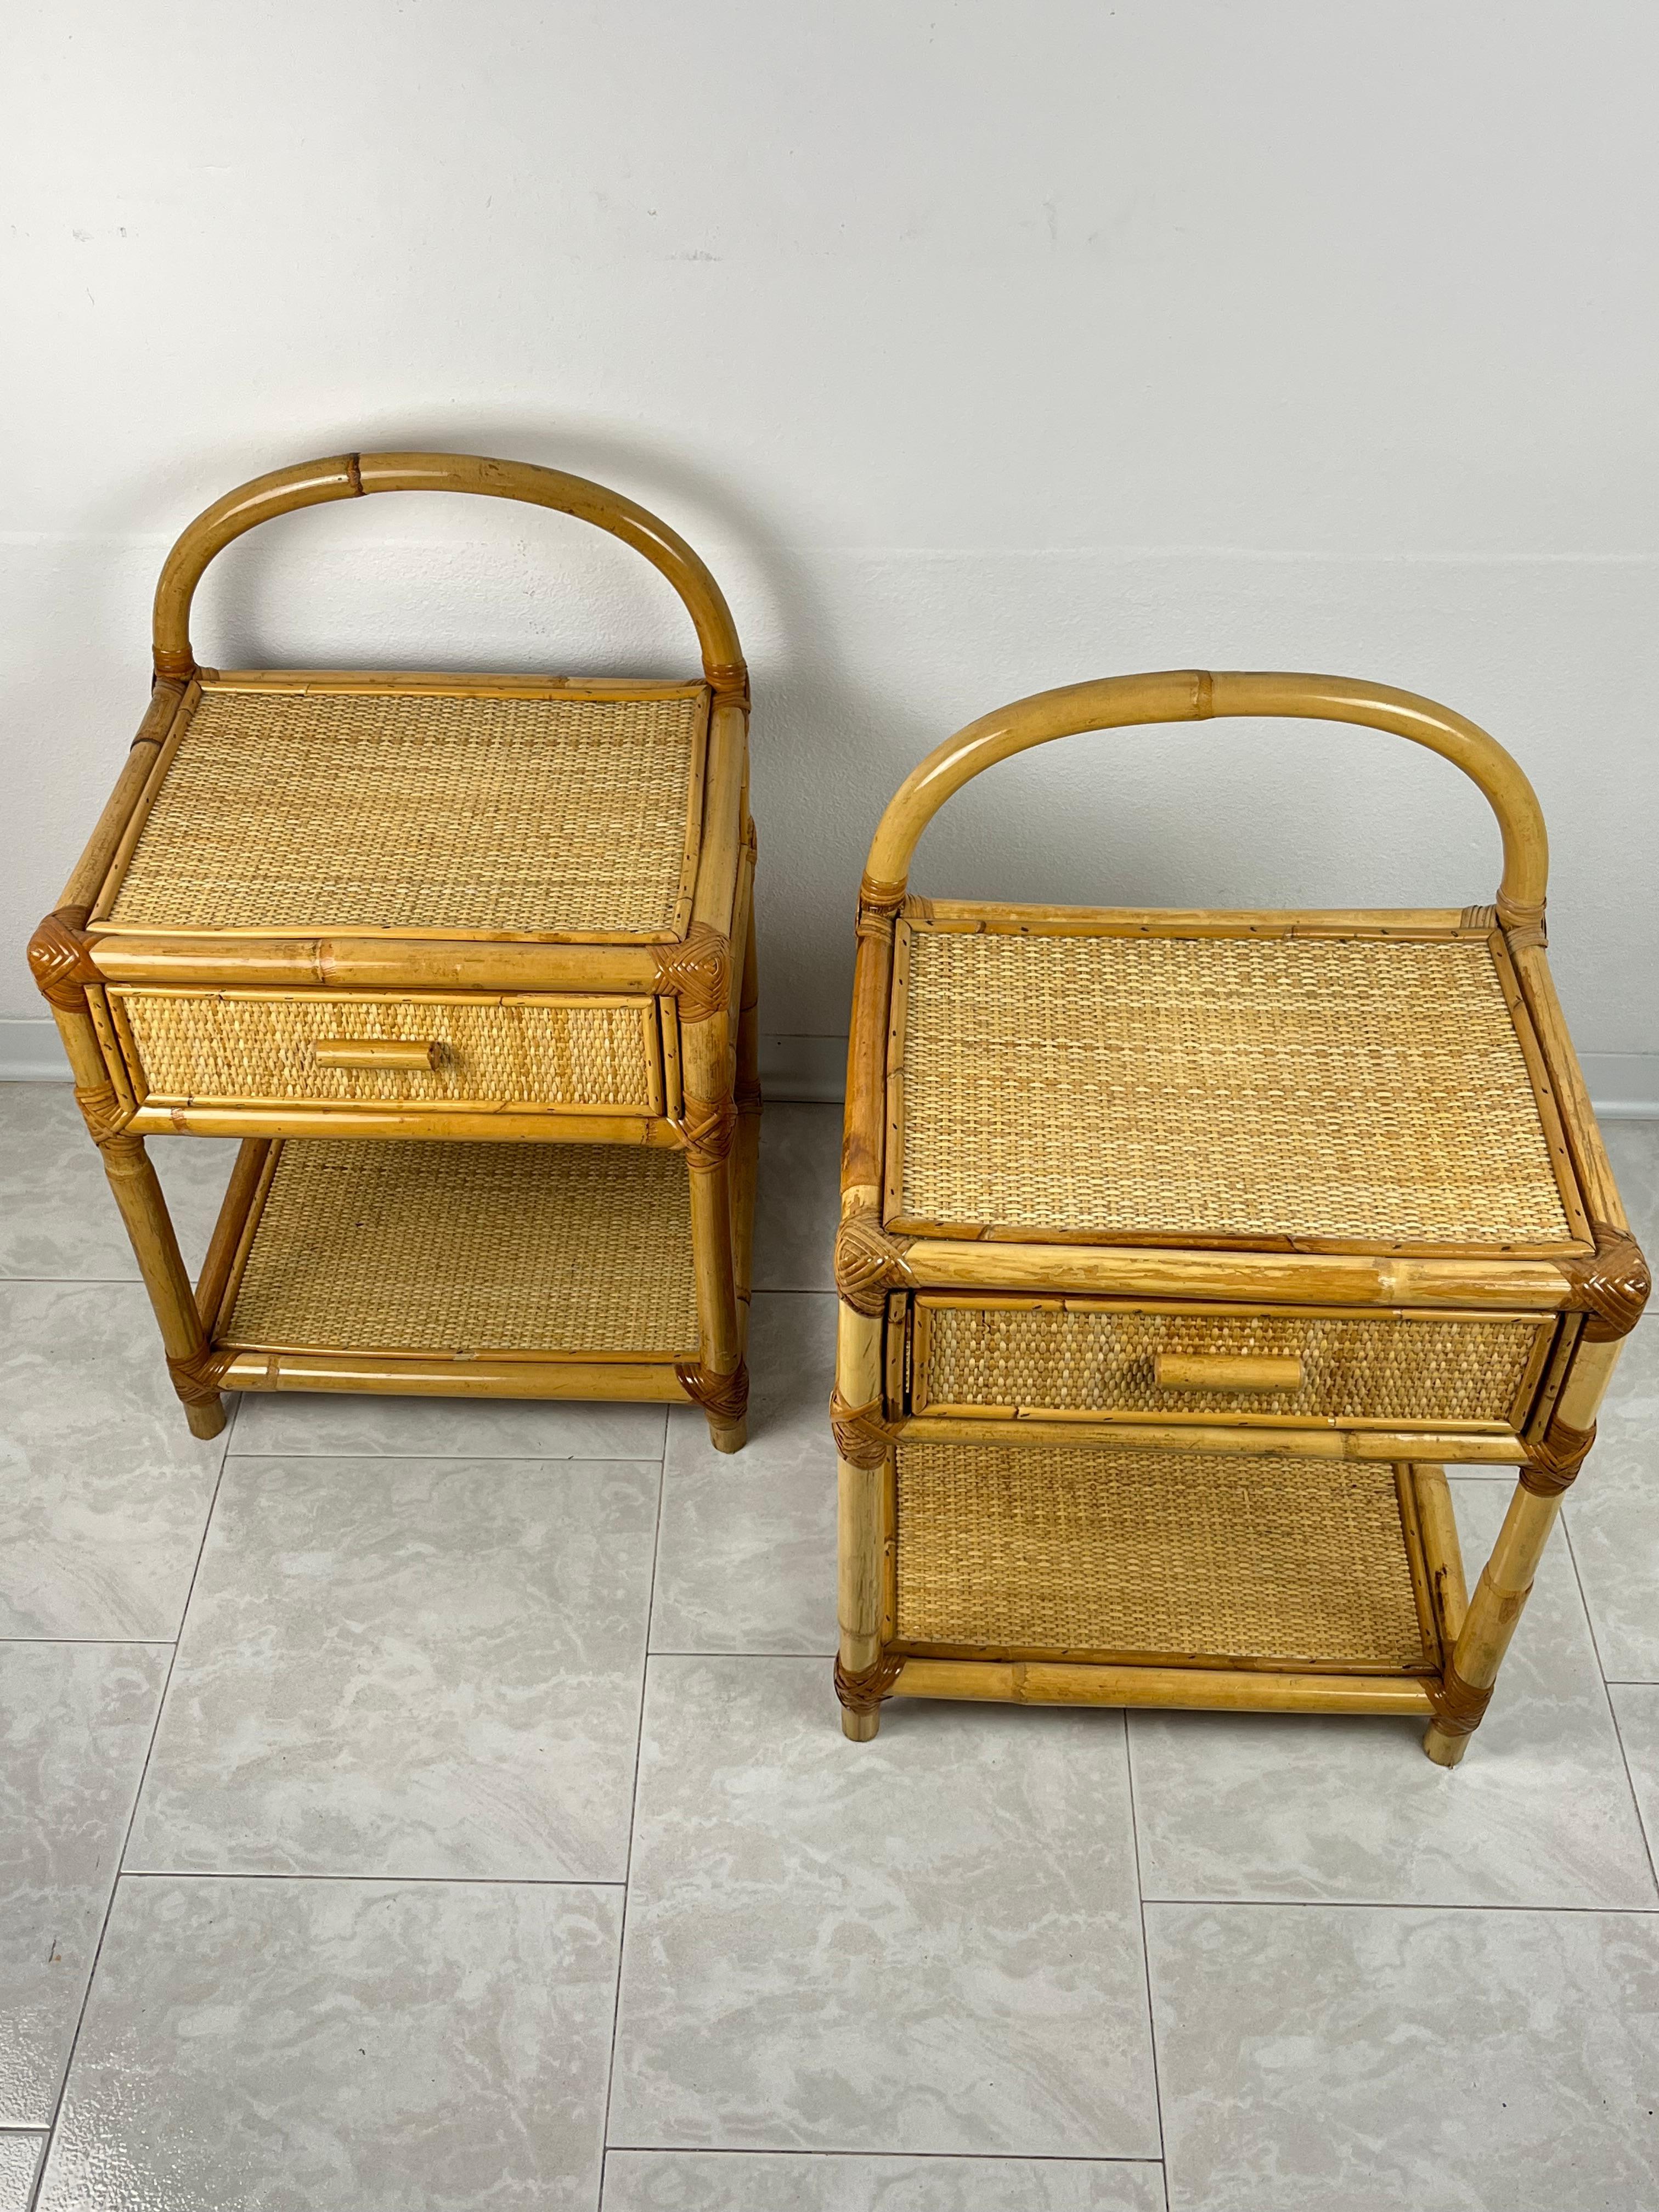 Pair of Vintage Italian  Bamboo and Rattan Bedside Tables 1970s For Sale 3